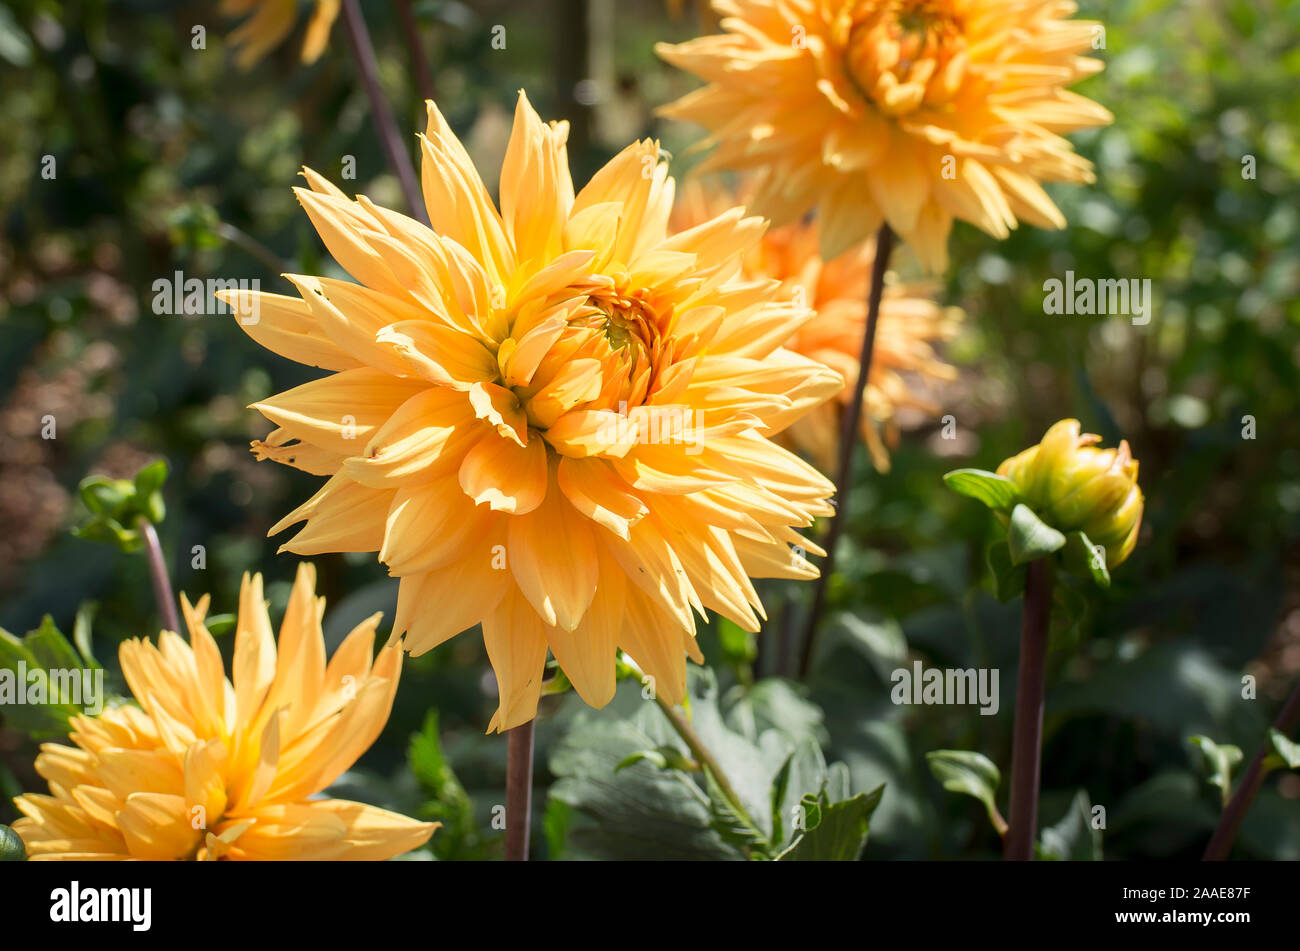 Large flowers of Dahlia Glory of Noordwijk is an inviting welcome to visitors entering this English garden in August Stock Photo